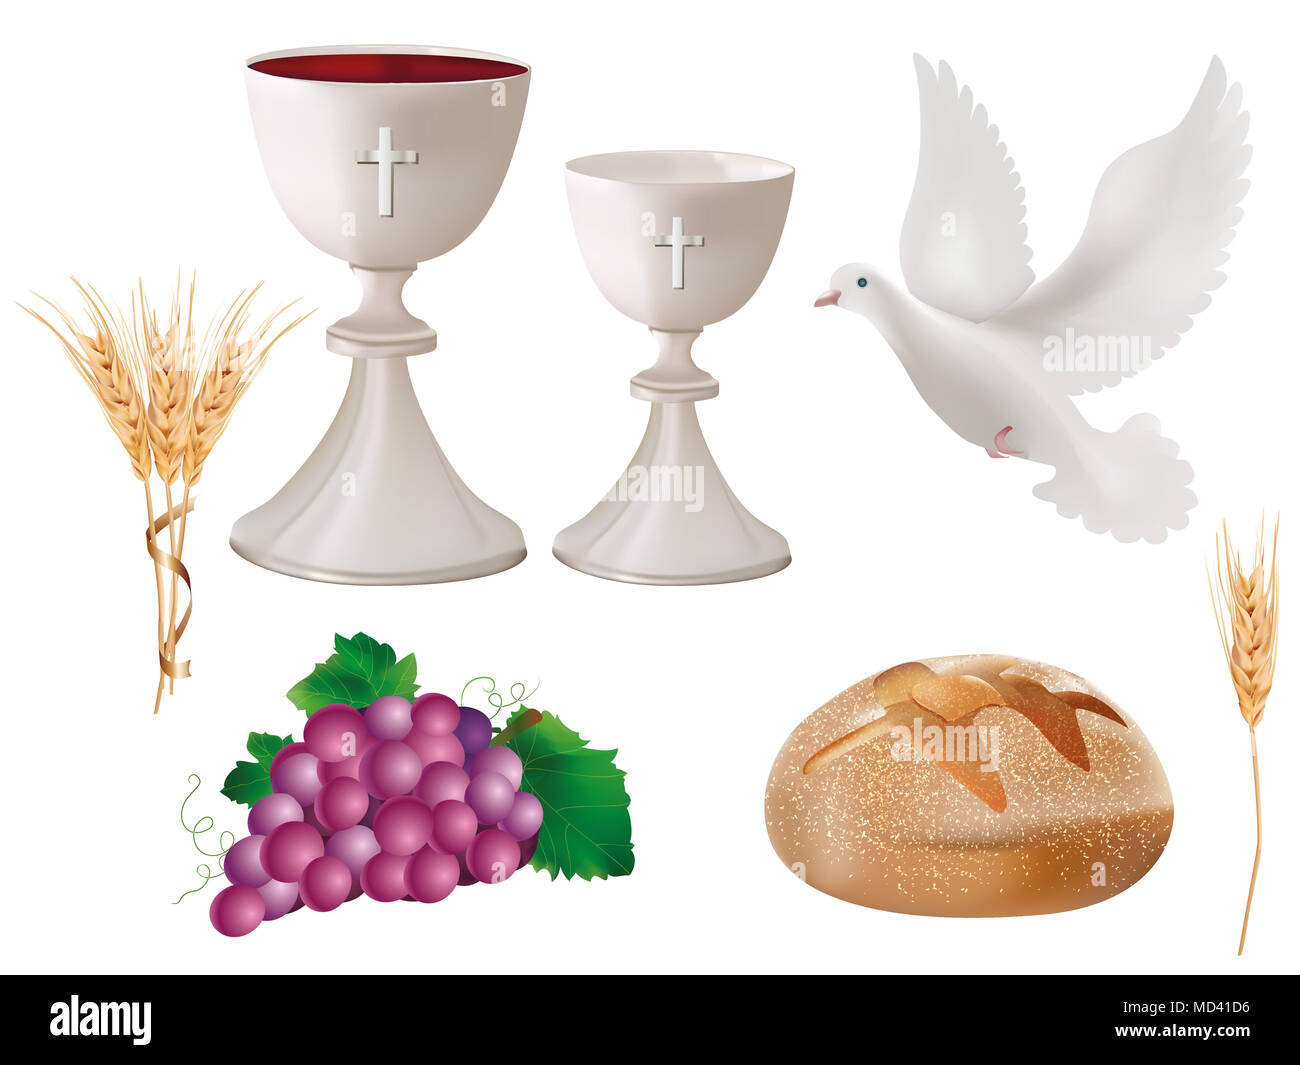 Isolated christian symbols:white chalice with wine, dove, grapes, bread, ear of wheat. Christian signs. Last supper symbols.3D realistic illustration Stock Photo